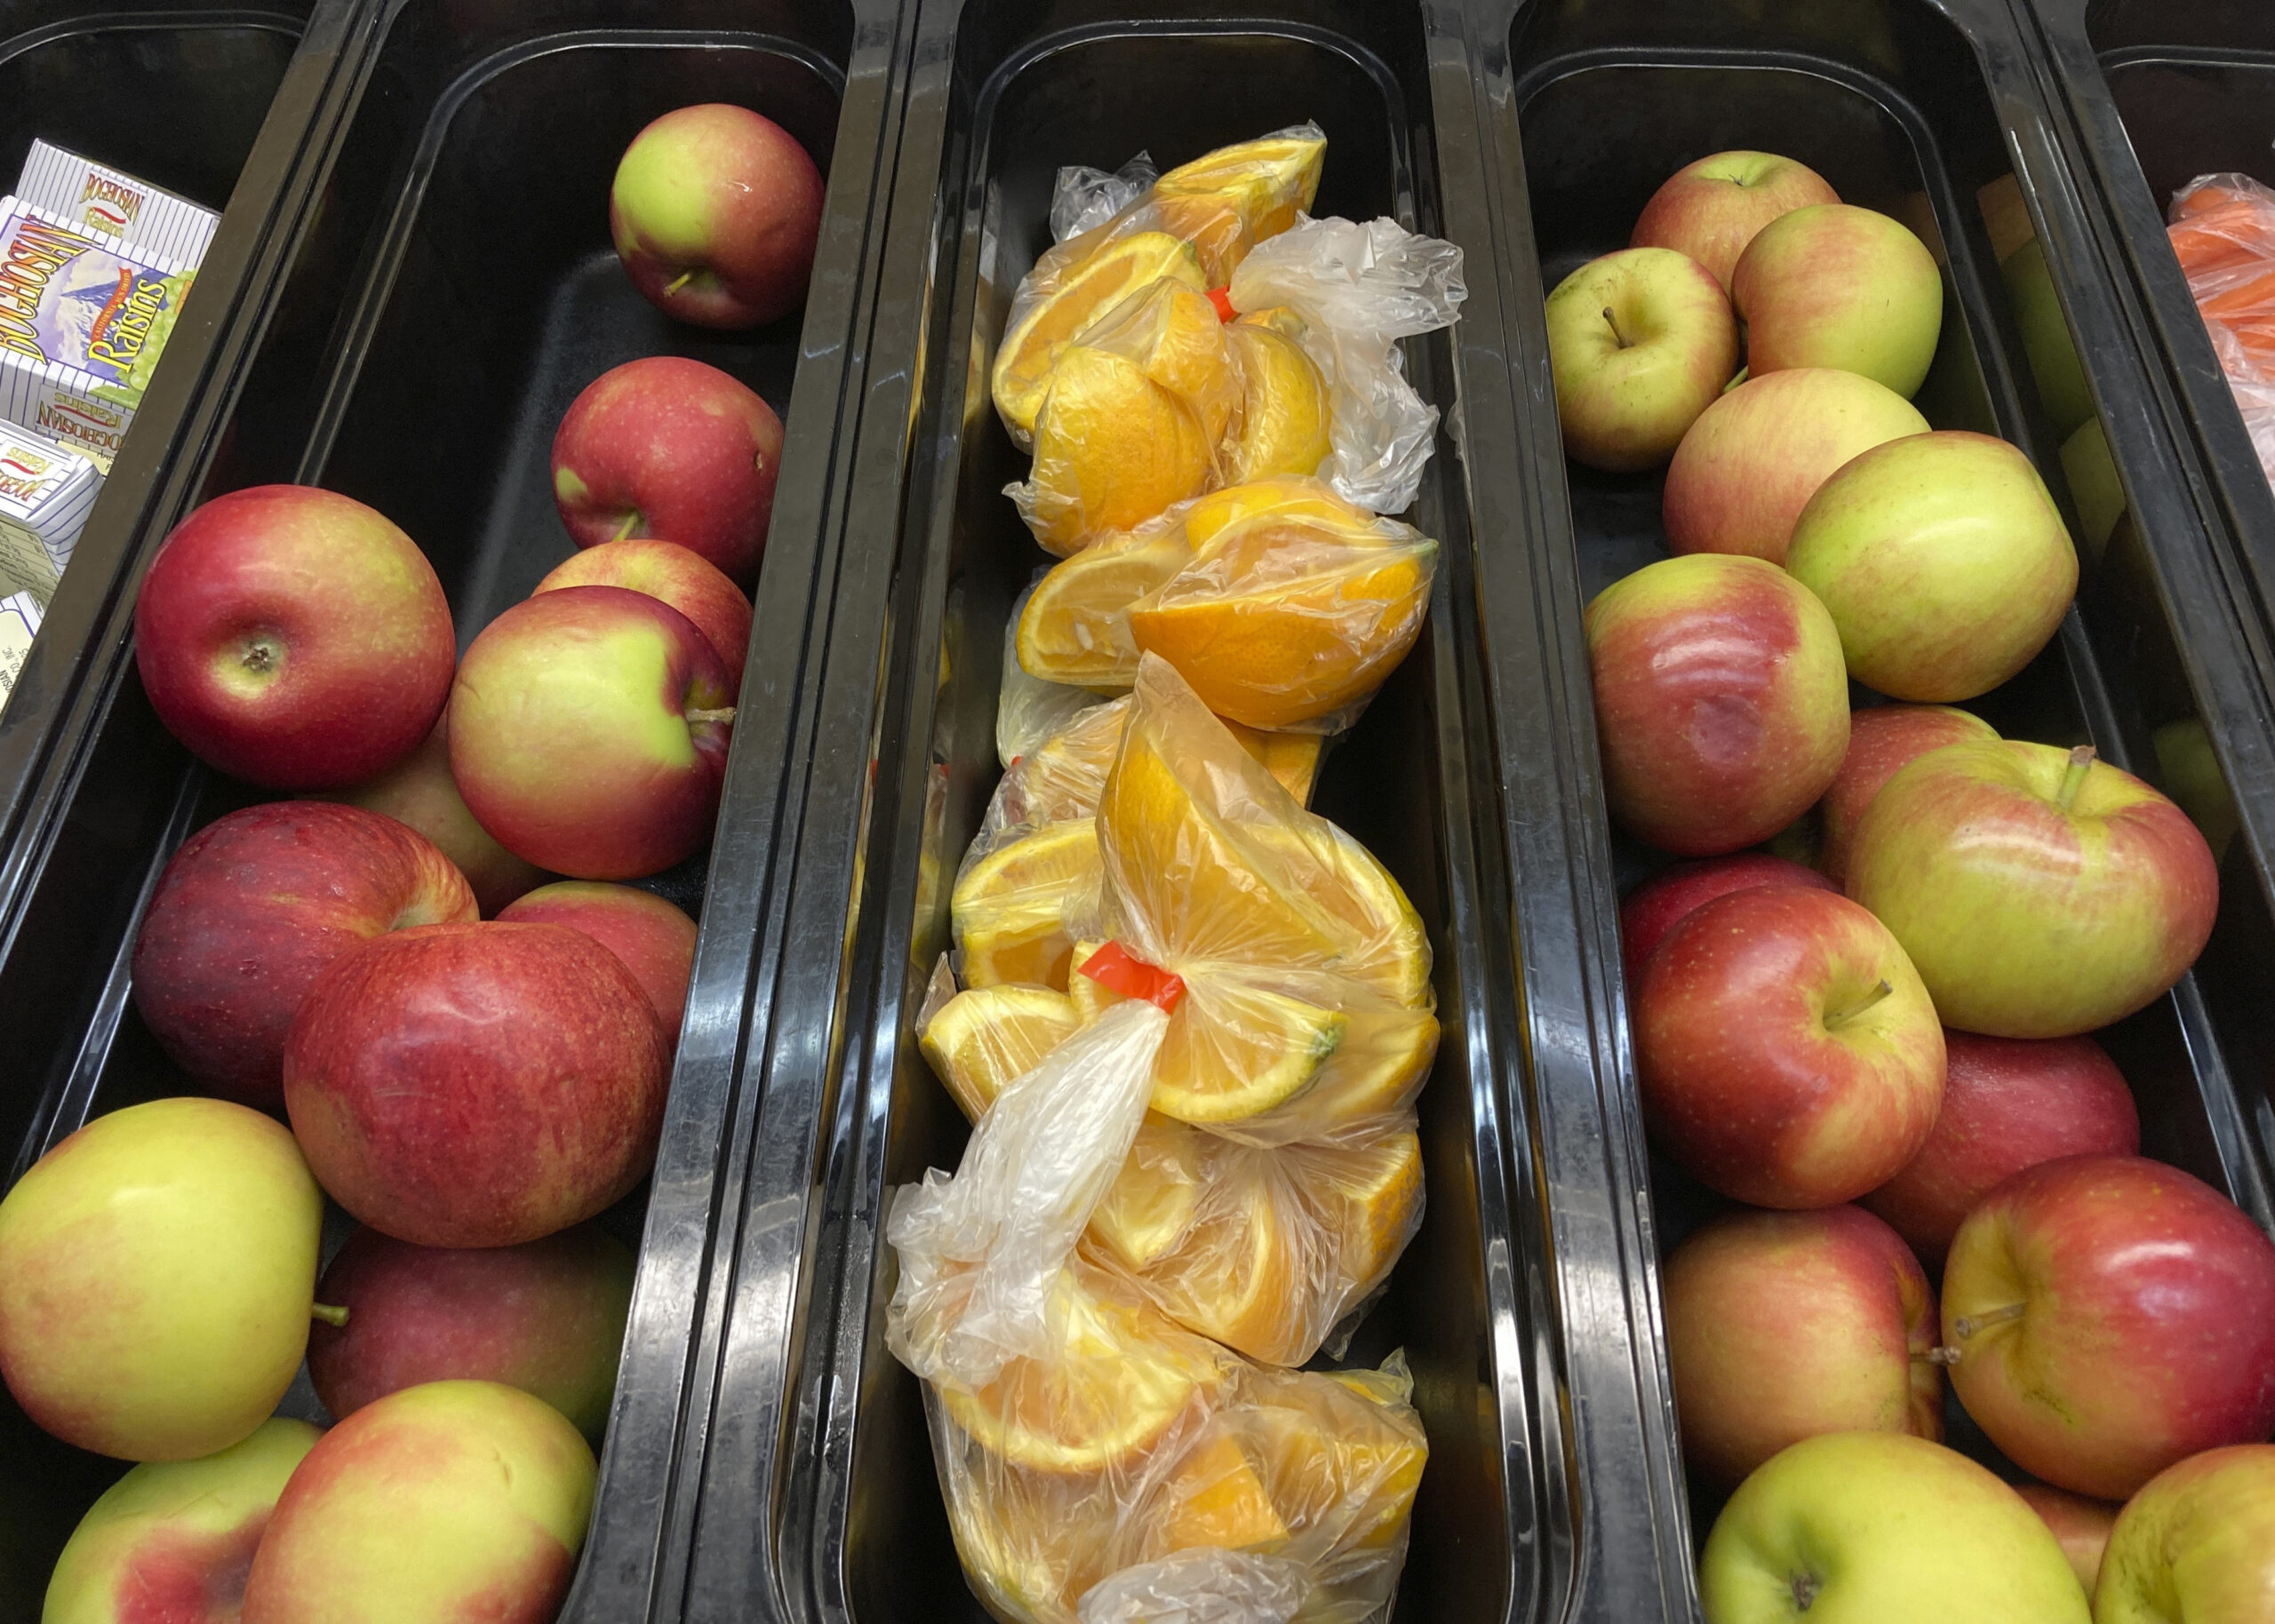 Apples and orange slices rest in trays for student lunch.